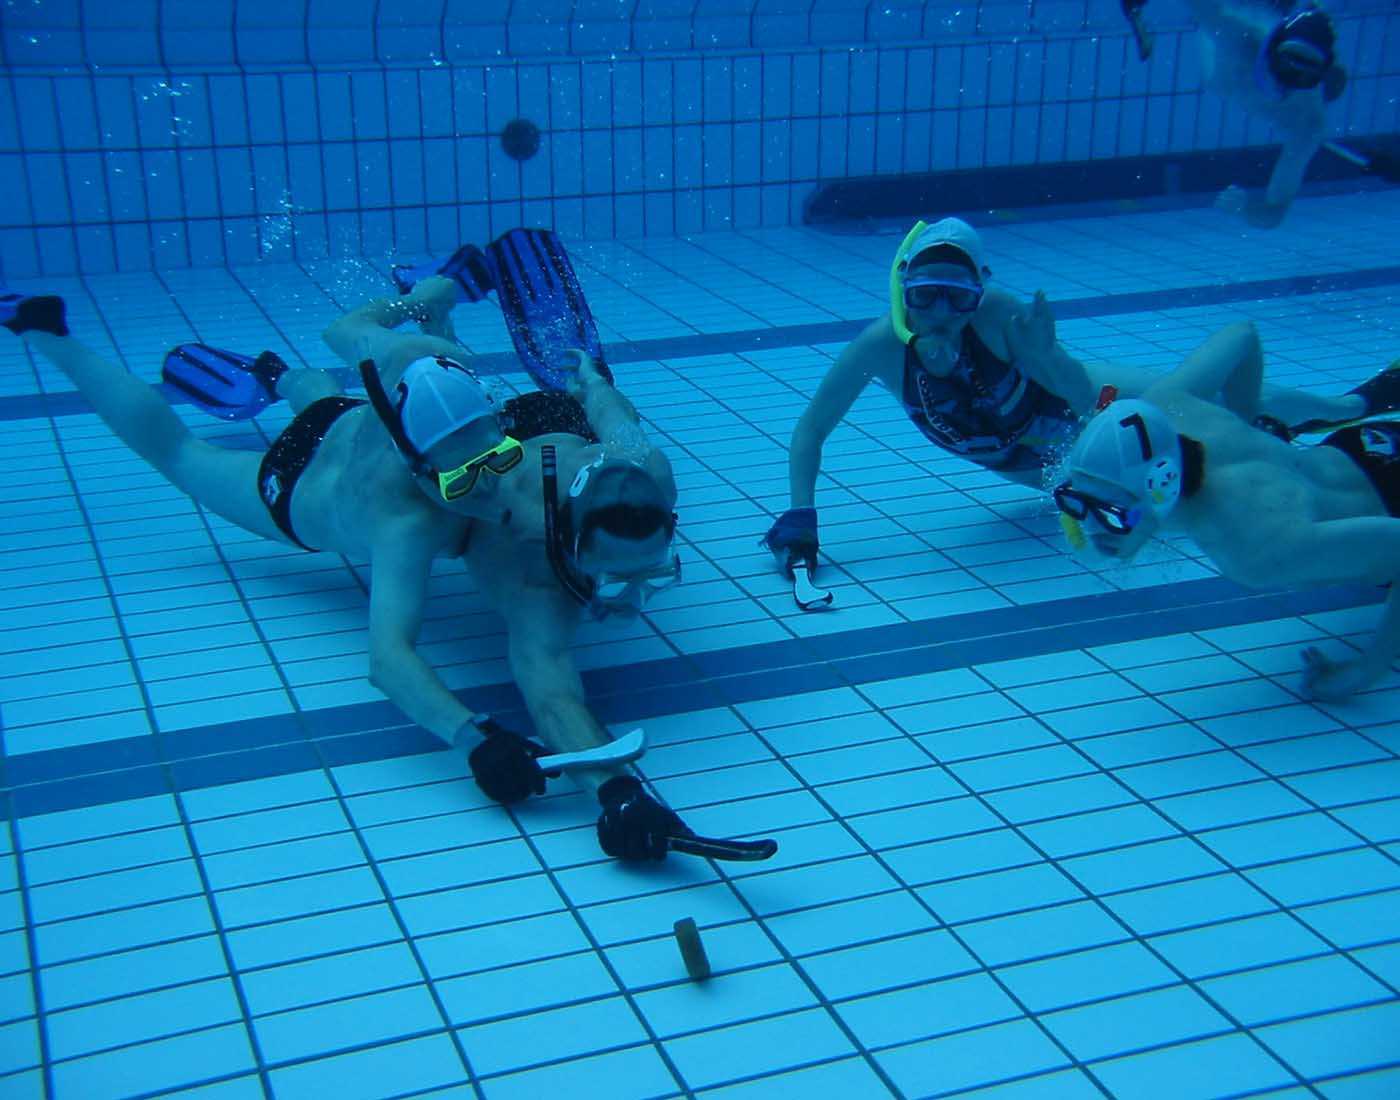 Underwater Hockey: Fun Facts, Amazing Fact, Did you know, Interesting Facts